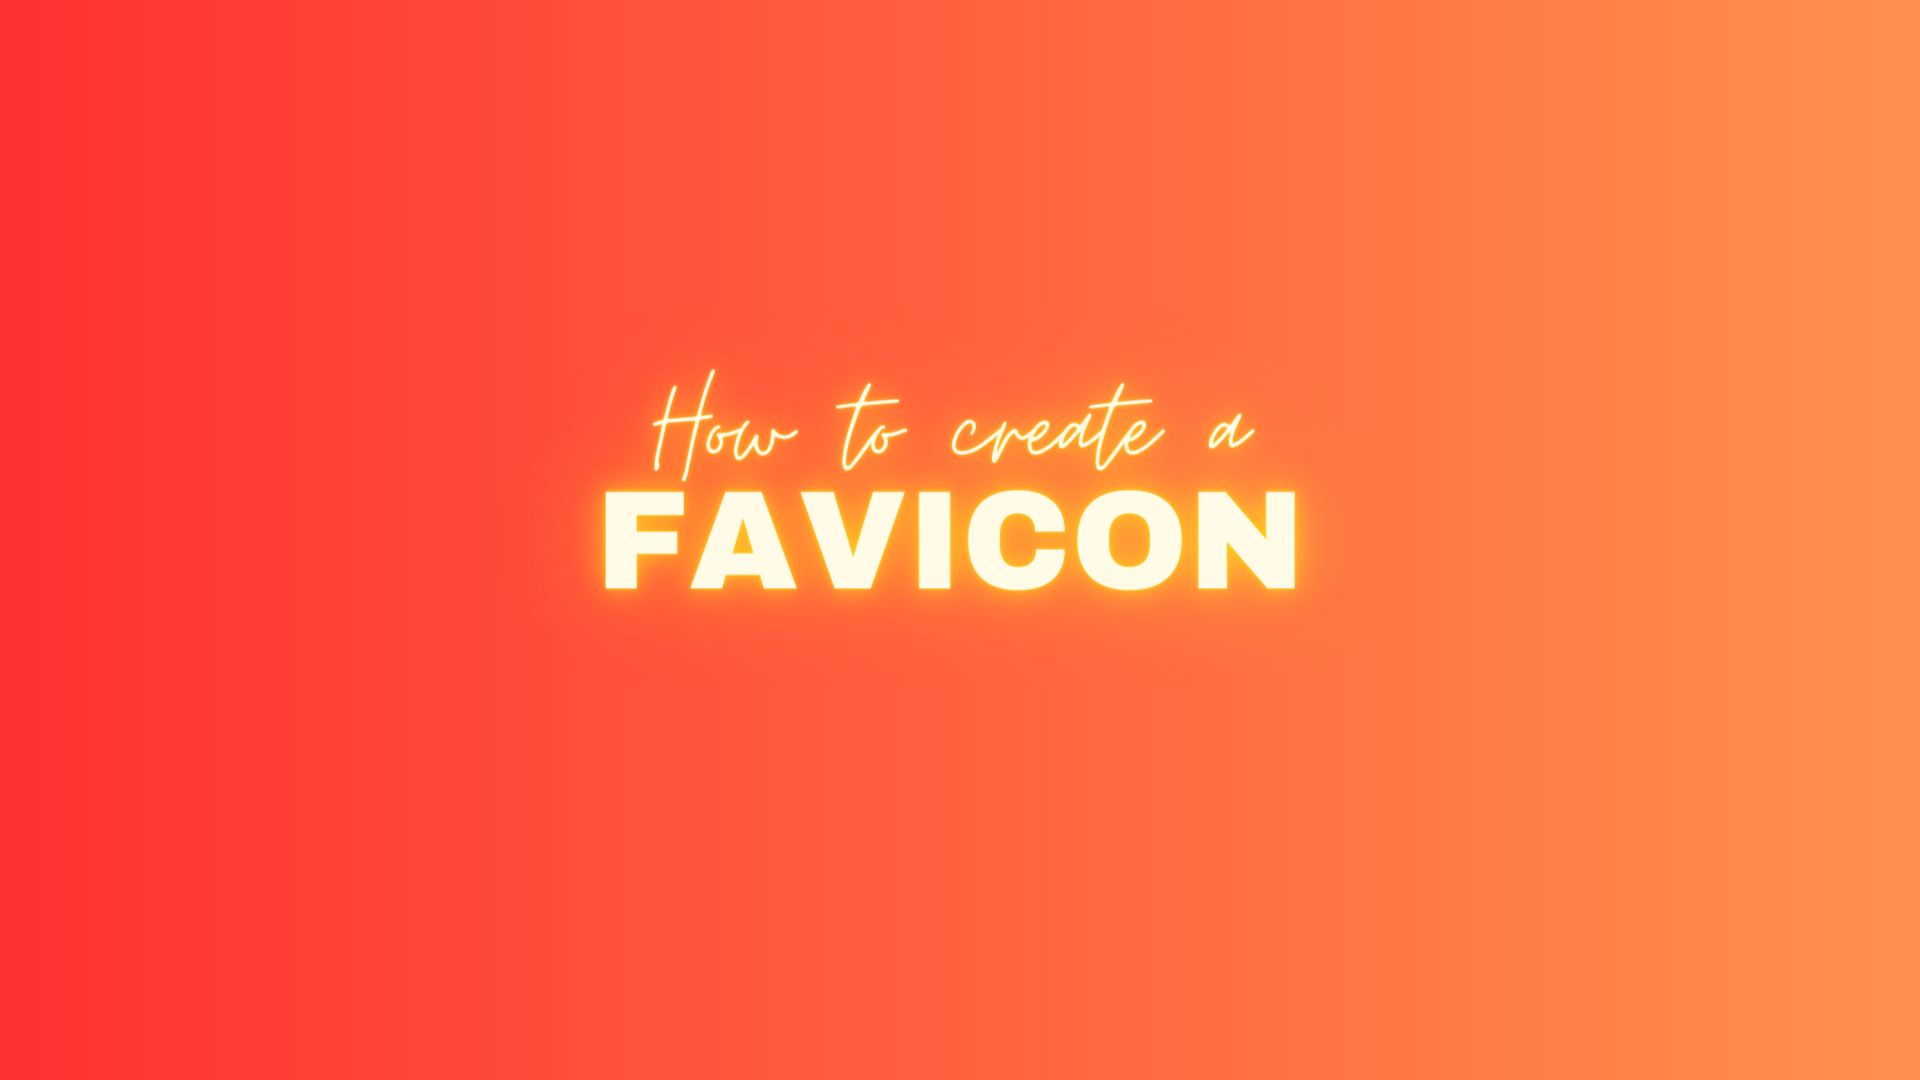 Yellow text 'how to create a favicon' on faded orange to light orange background.